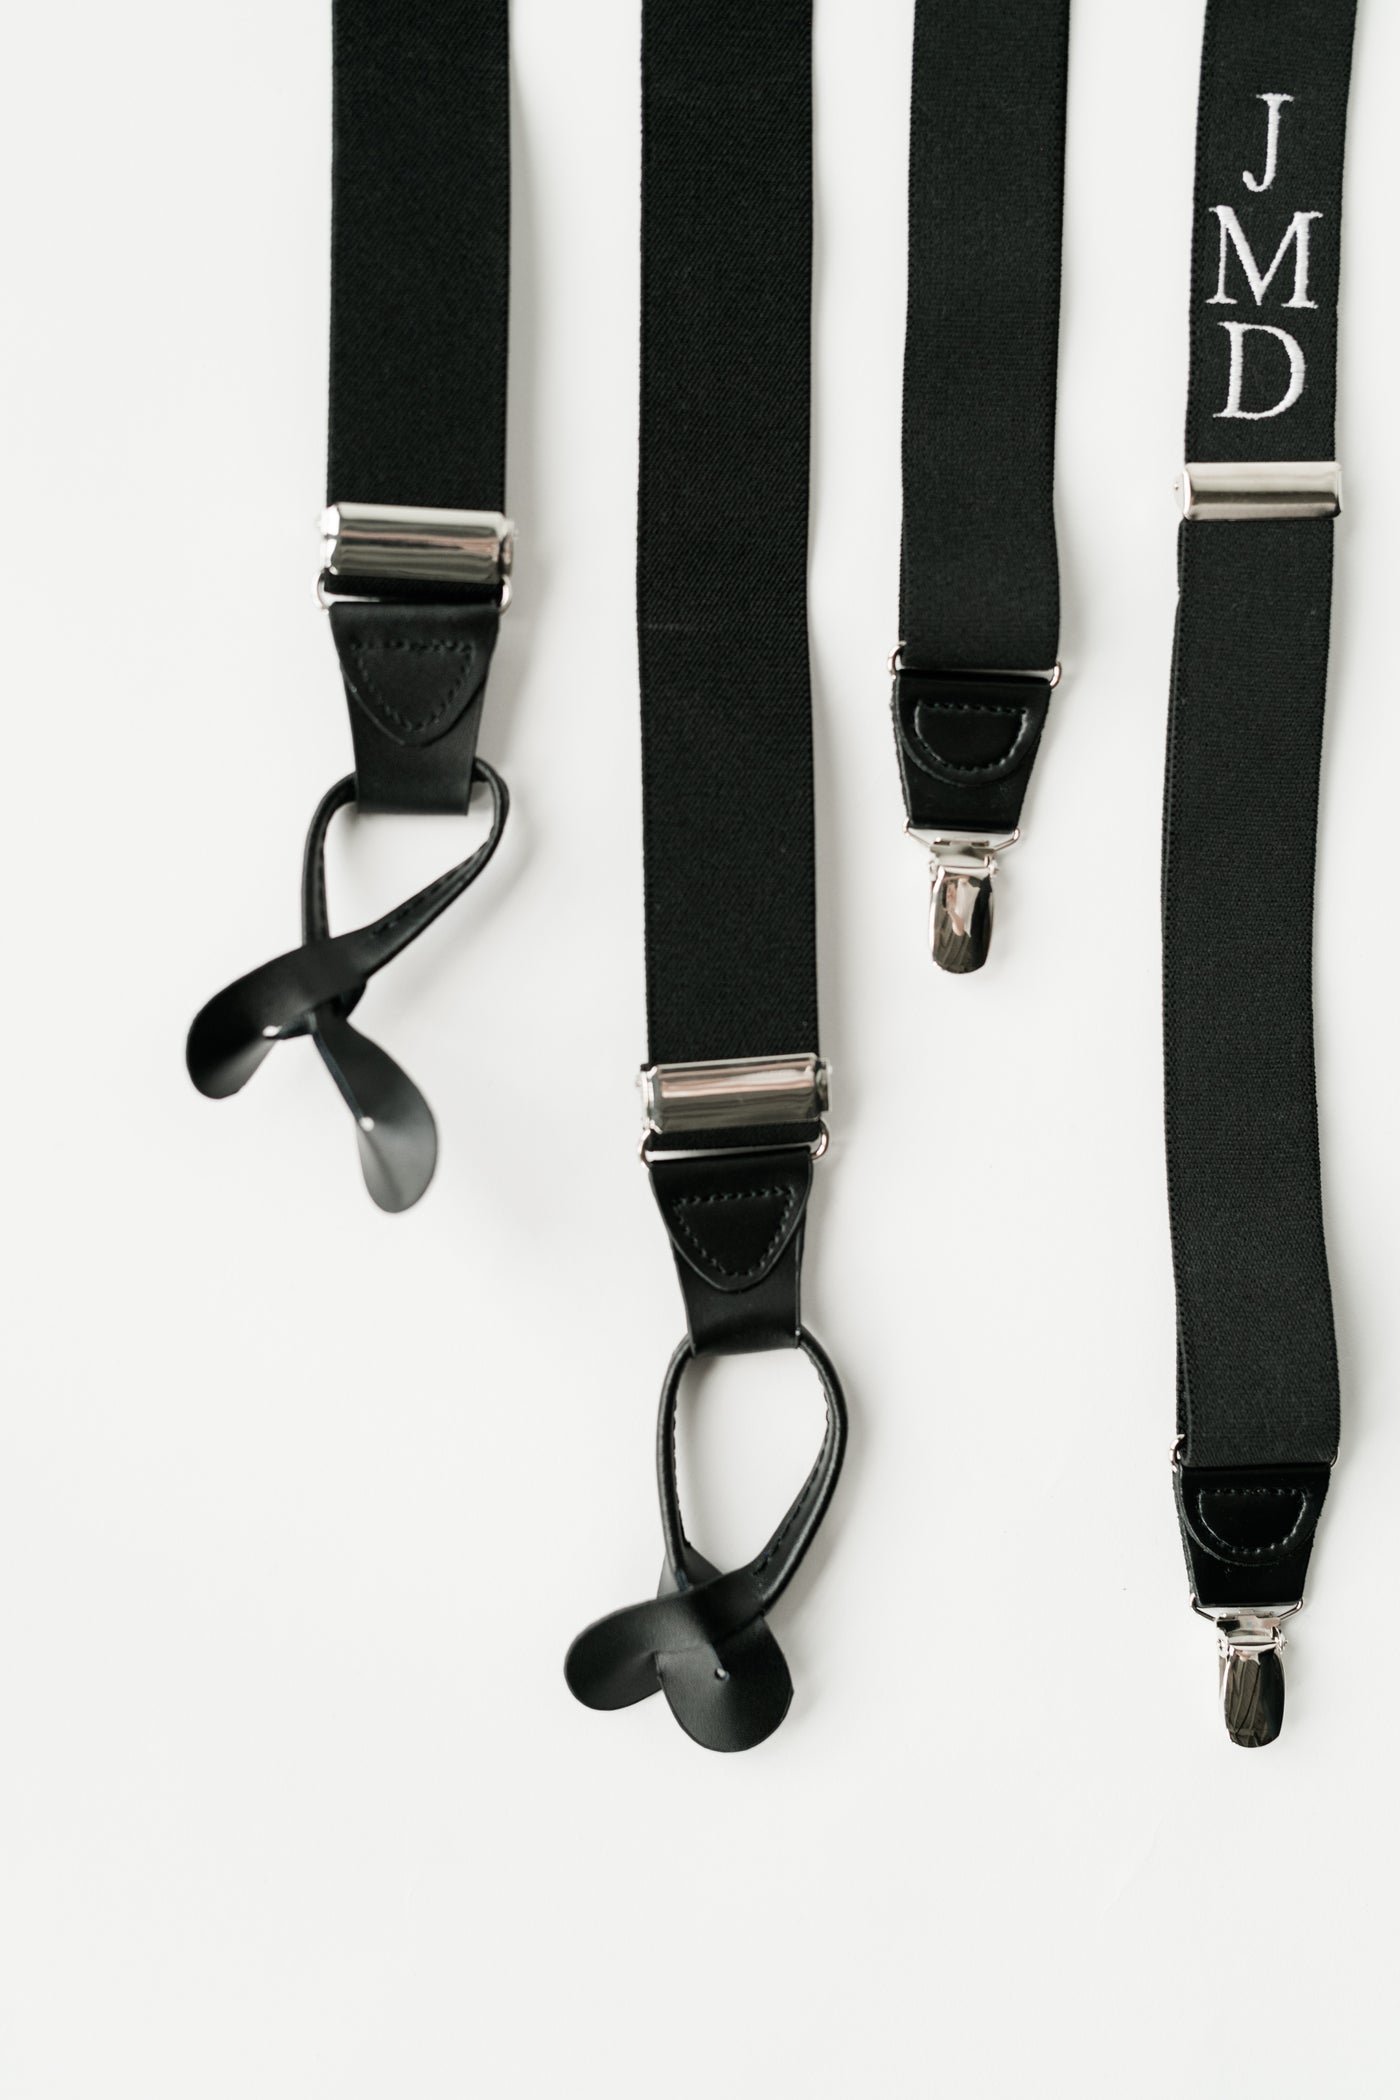 clip on end and button on suspender